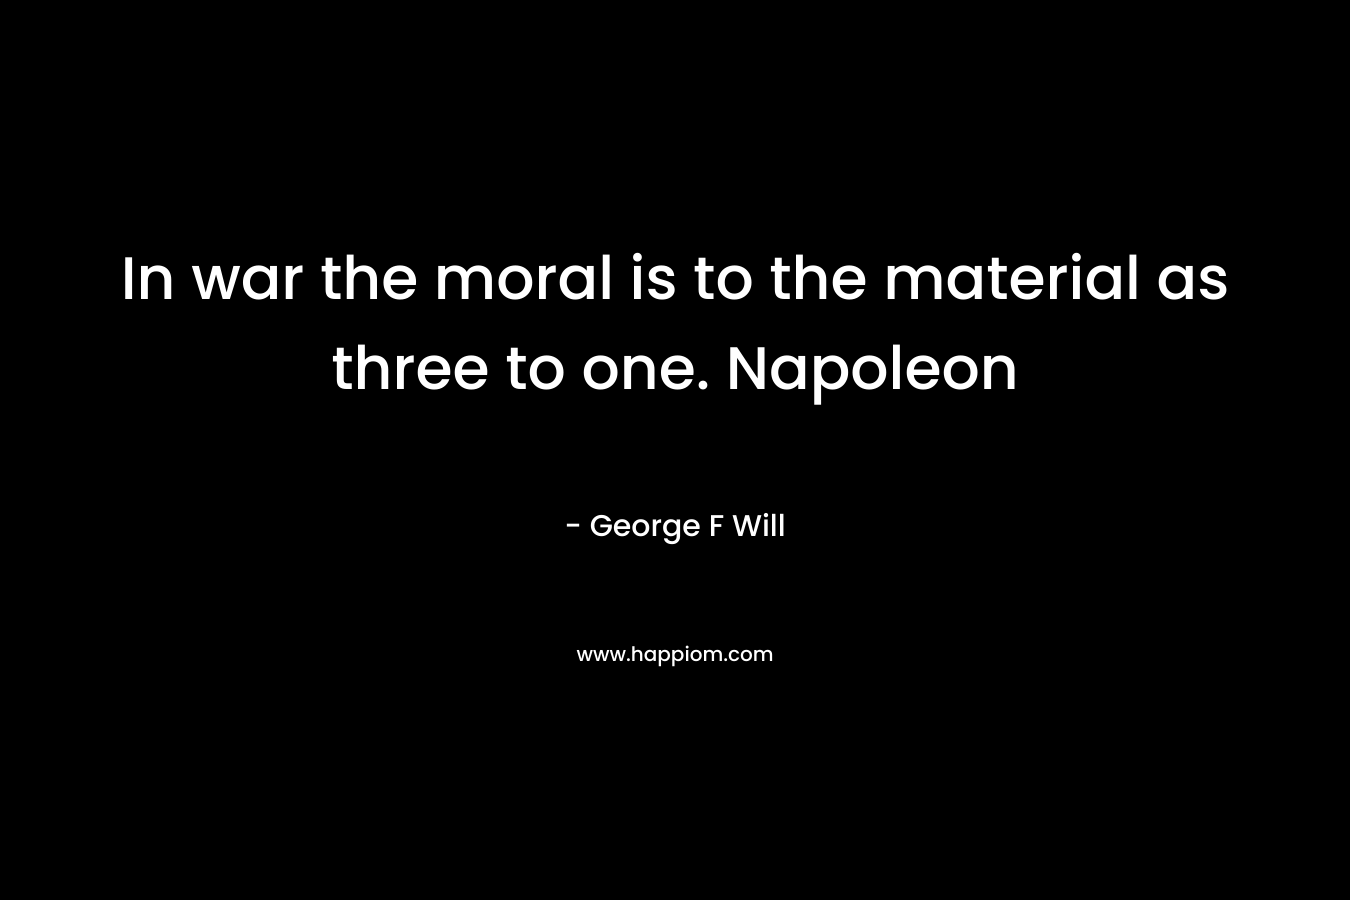 In war the moral is to the material as three to one. Napoleon